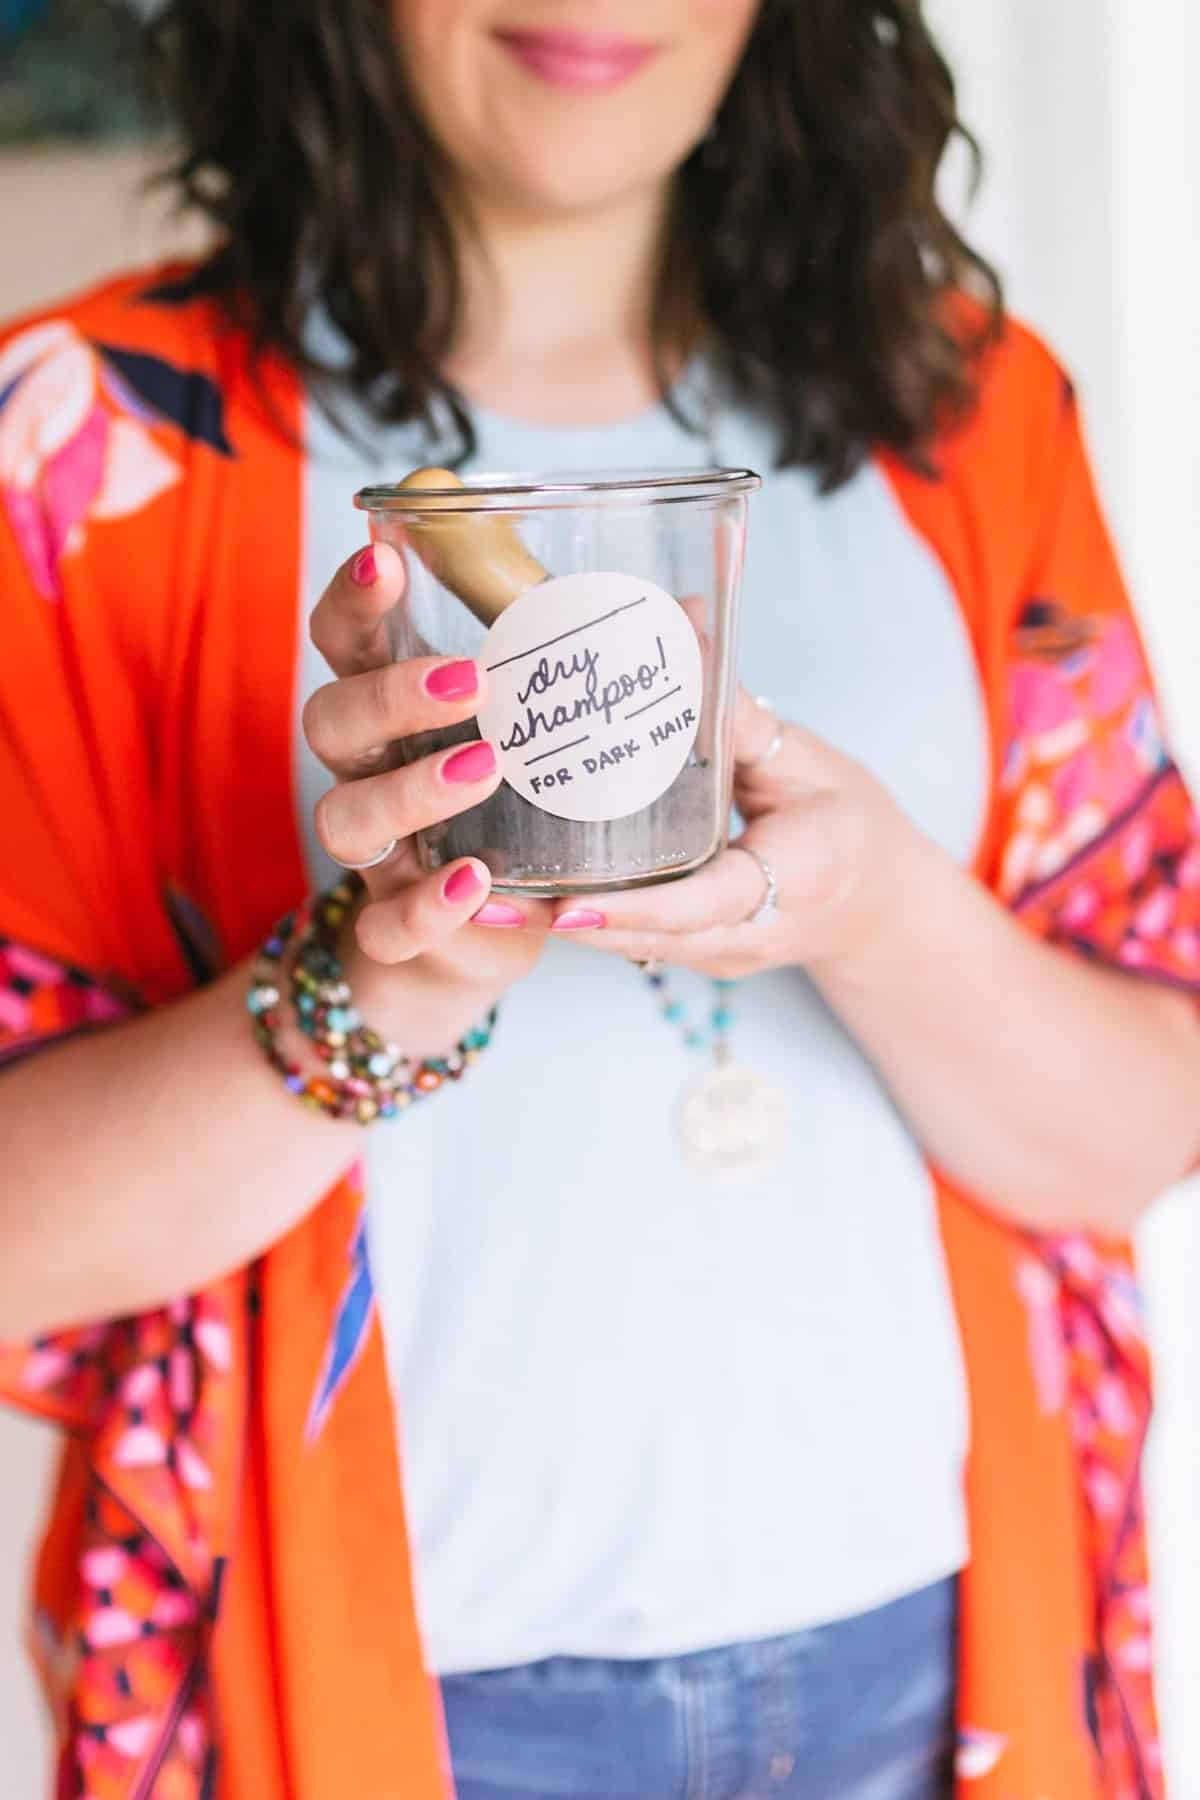 Brunette woman in a neutral top and orange kimono holding a jar labeled "dry shampoo" in both hands.